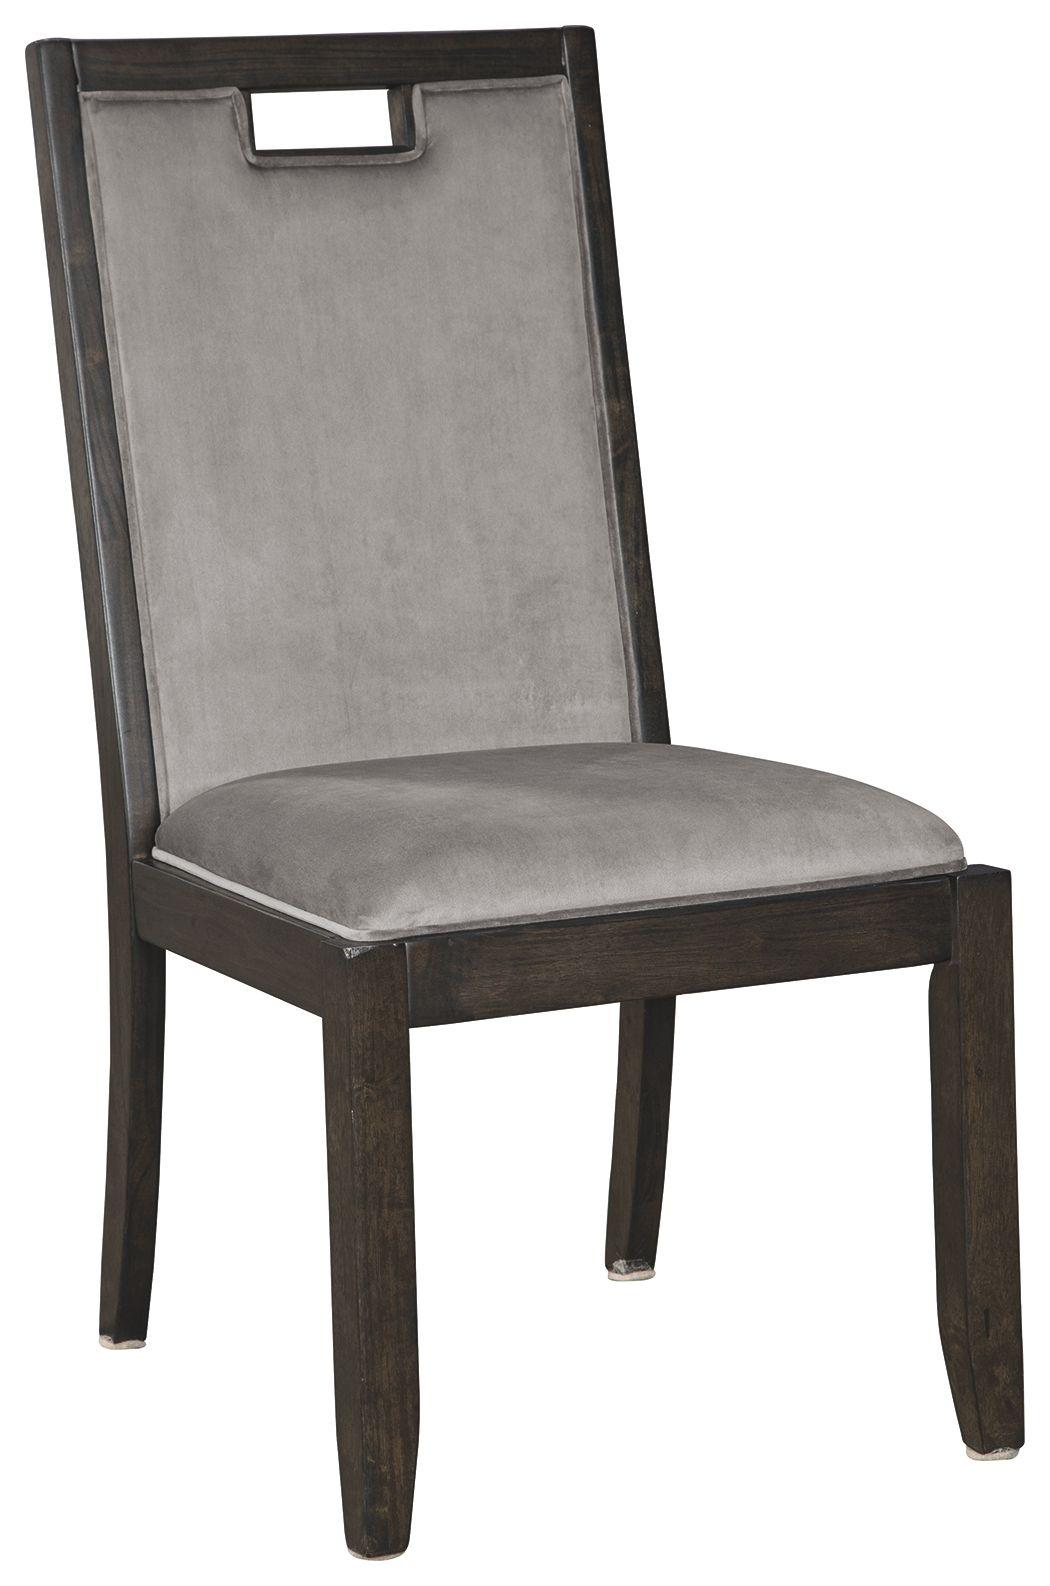 Signature Design by Ashley® - Hyndell - Gray / Dark Brown - Dining Uph Side Chair (Set of 2) - 5th Avenue Furniture